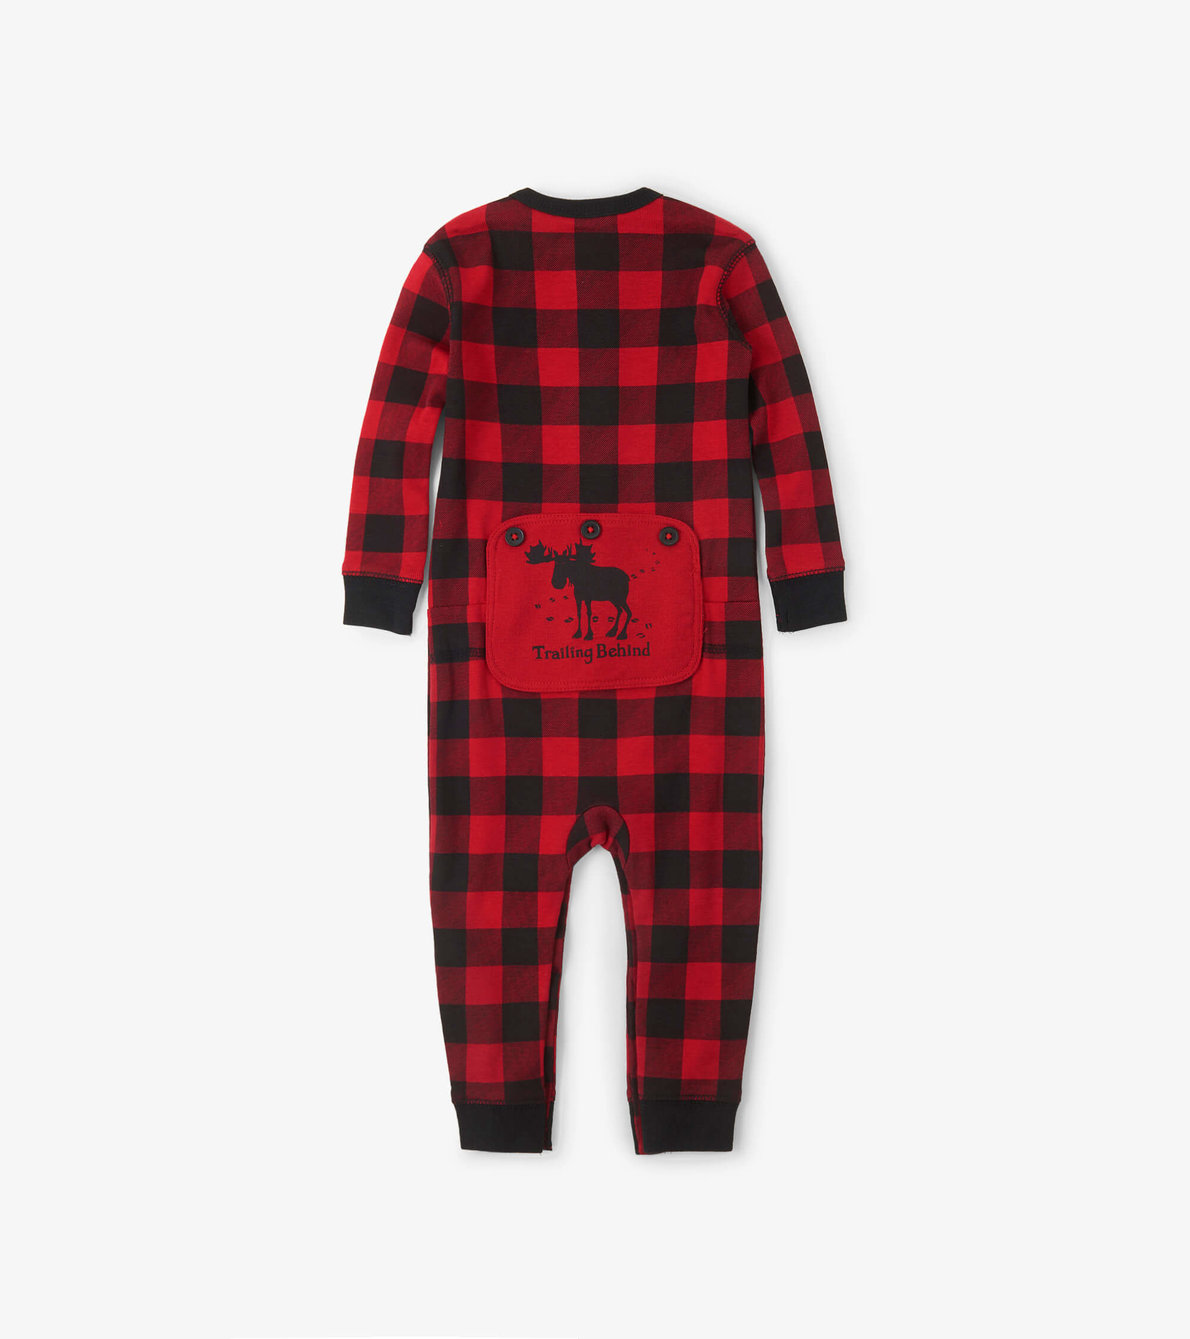 View larger image of "Trailing Behind" Buffalo Plaid Baby Union Suit